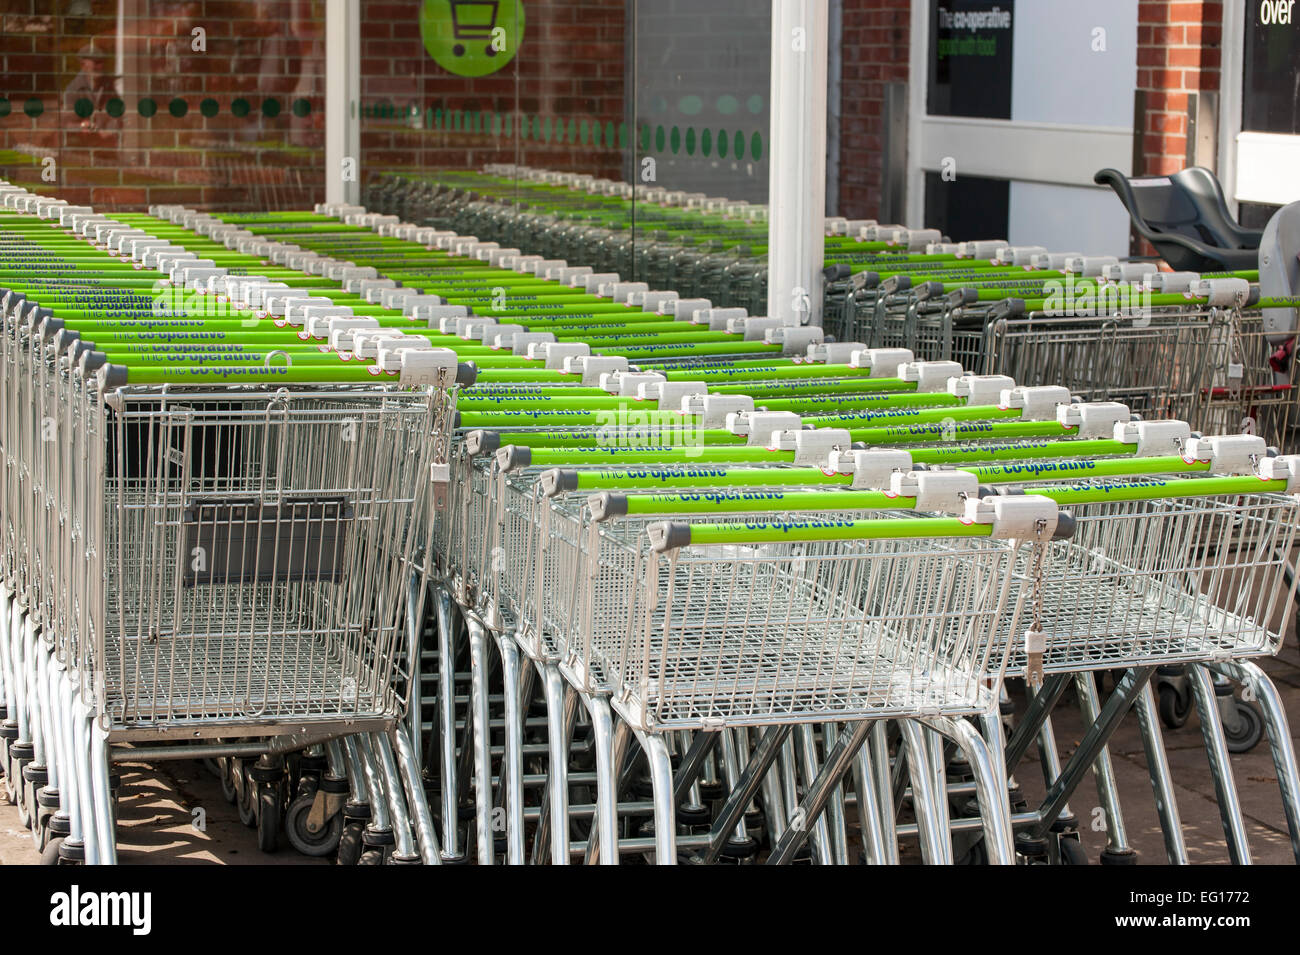 rows of co-op shopping trolleys Stock Photo